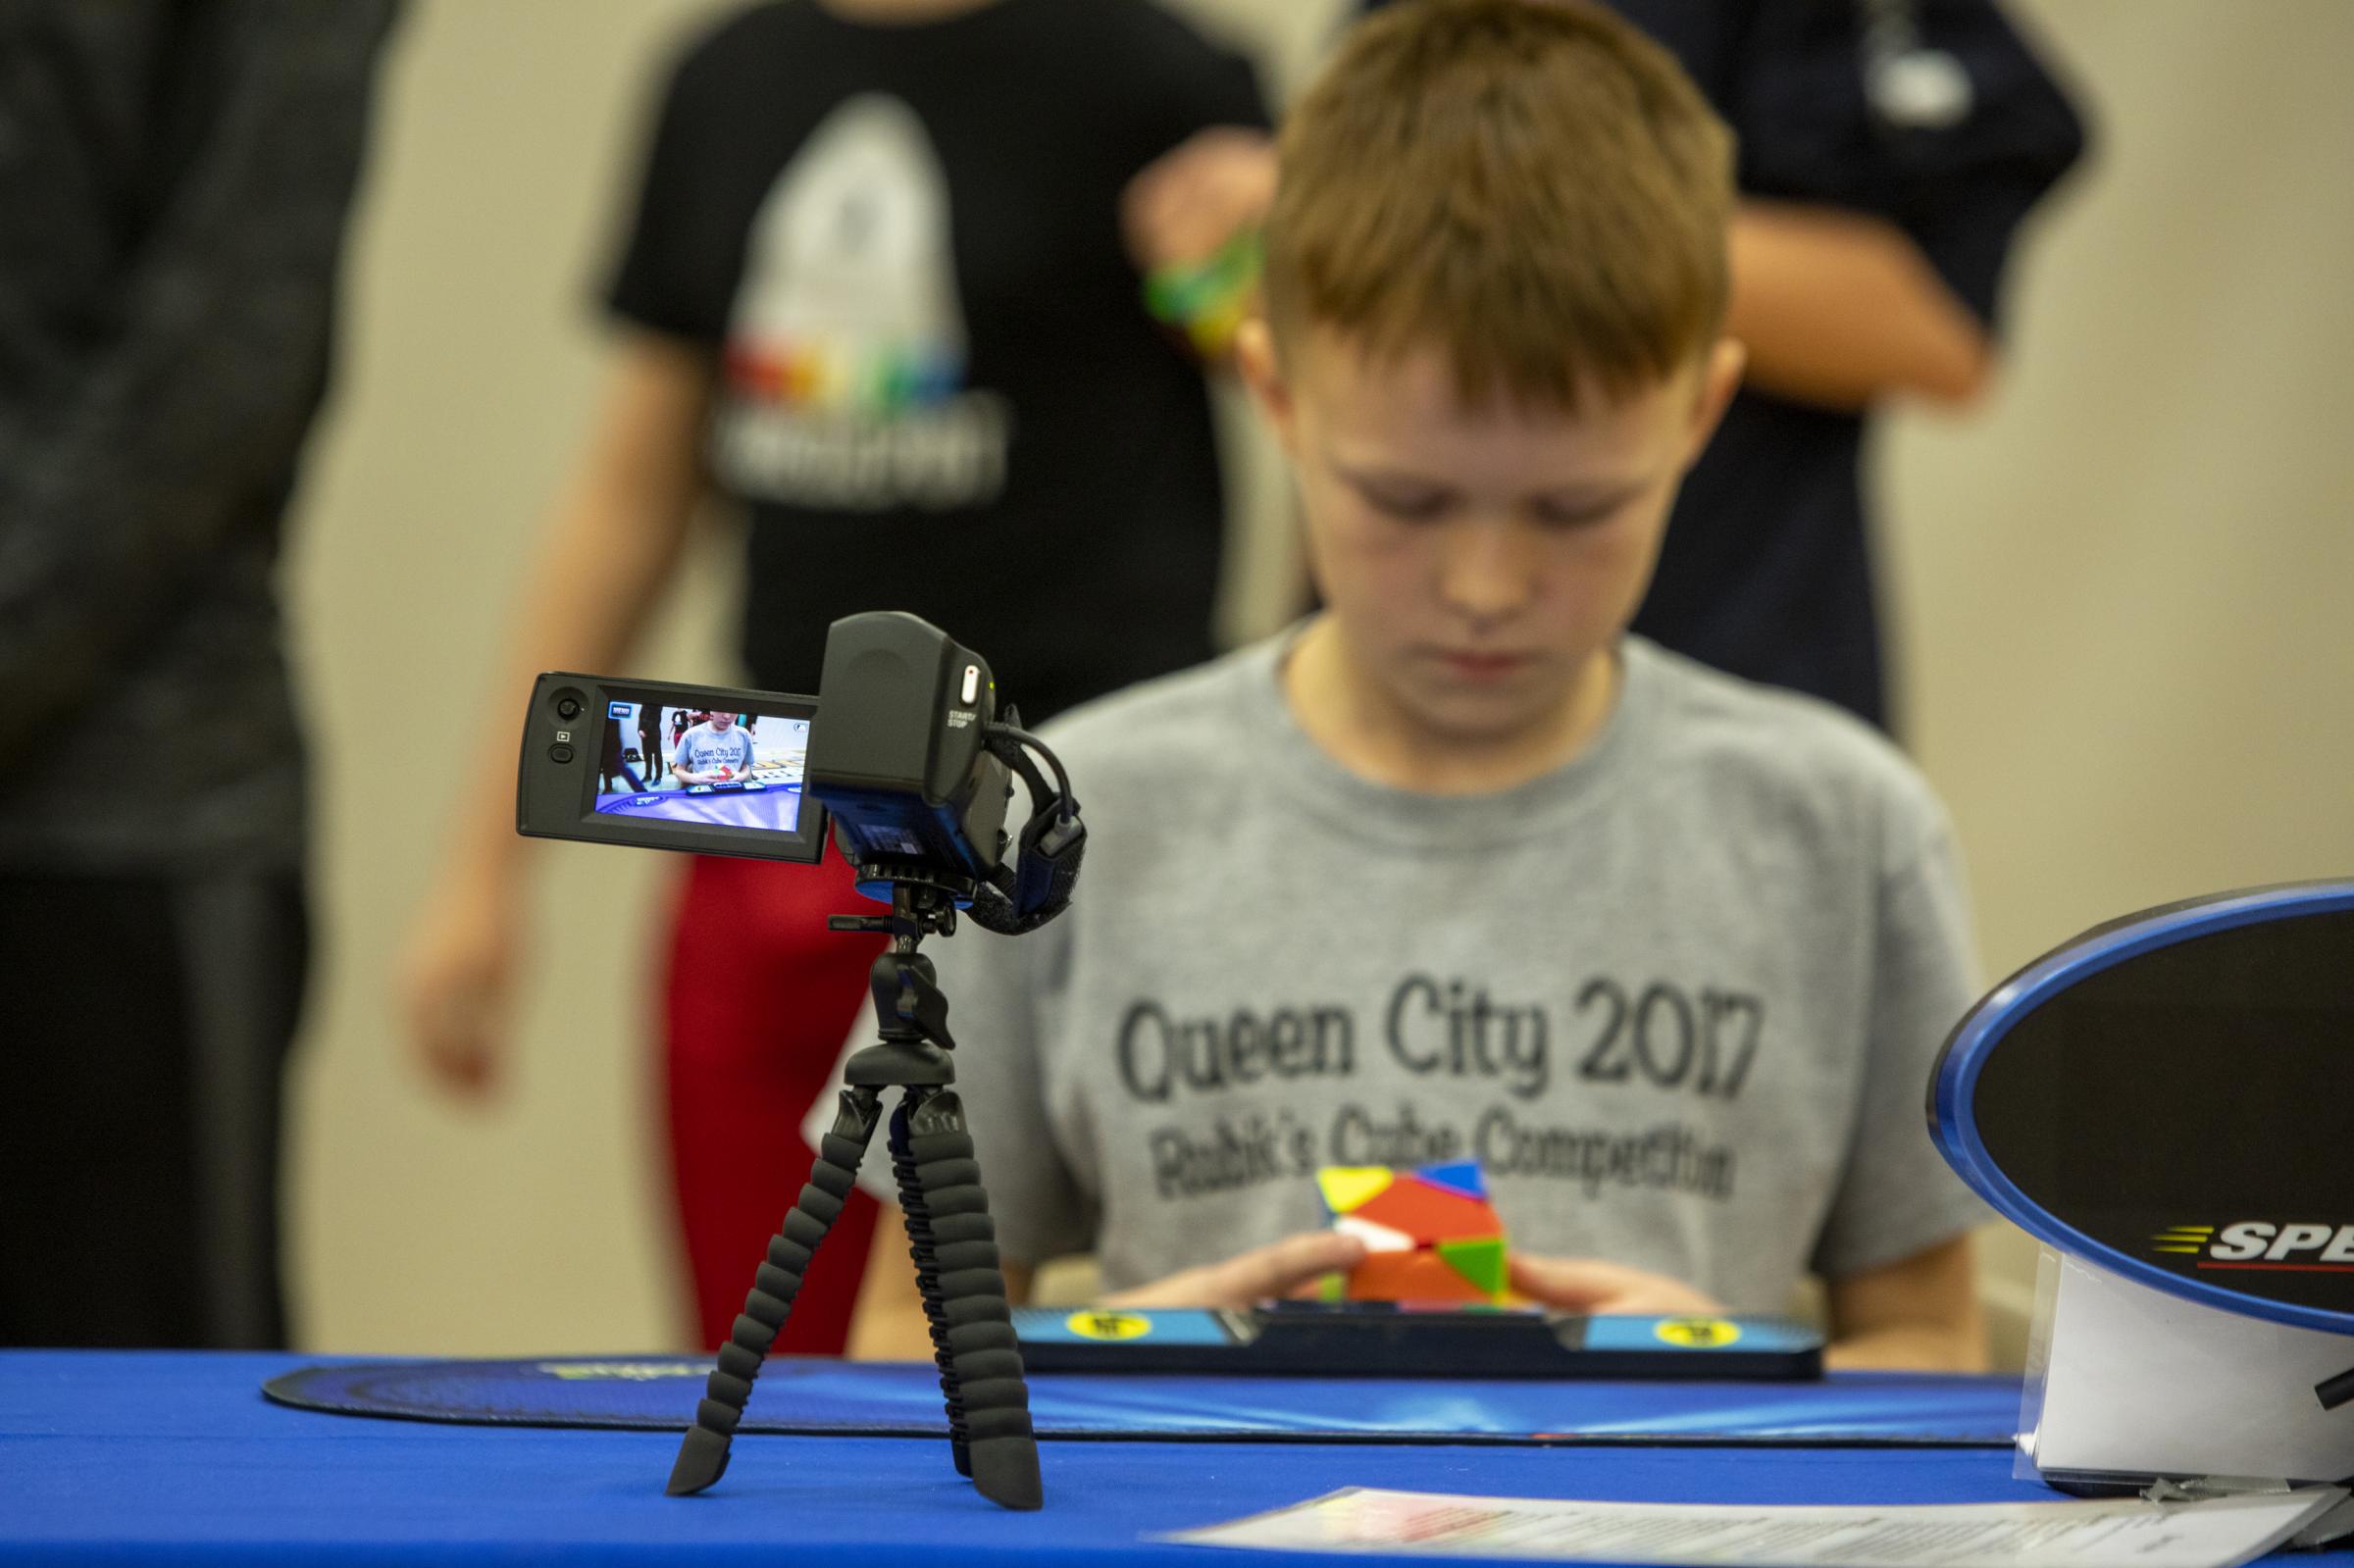 Speedcubers - Many competitors set up video cameras or their phones to record solves to share online or to...